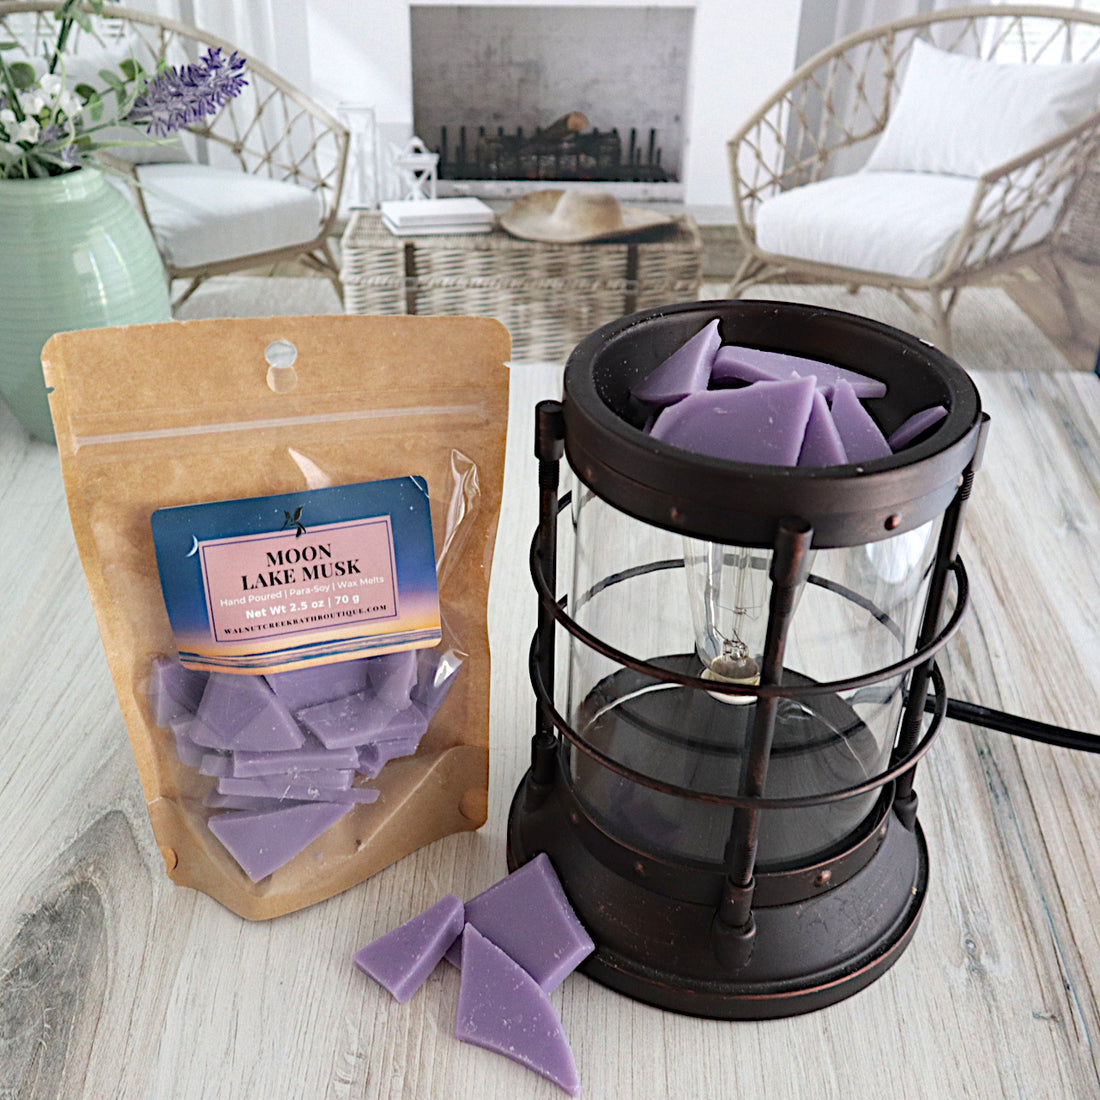 moon lake musk wax melts are in a bag that is standing next to a wax burner. the wax melts are purple in color and shards in shape. the burner is full of these shards while there are some that are piled on the table in front of it.  this is all sitting on a washed out wooden base with a couple of chairs in the background next to a fireplace